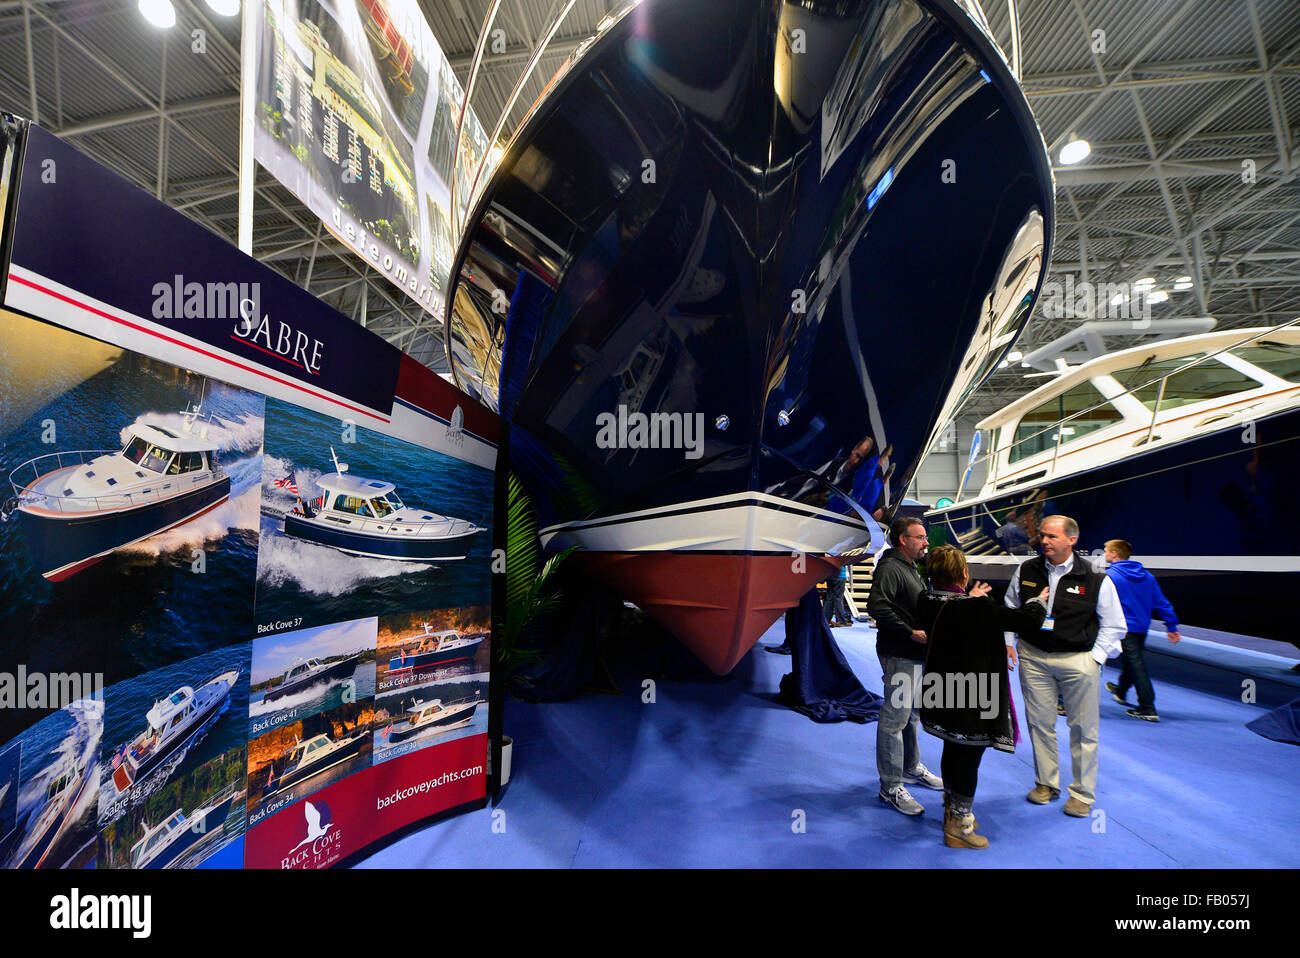 New York, USA. 6th Jan, 2016. People visit New York Boat Show in New York, the United States, on Jan. 6, 2016. The five-day New York Boat Show which features the latest and greatest in boating, including kayaks, yachts and water sport boats with high technology kicked off at the Javits Center in New York on Wednesday. Credit:  Wang Lei/Xinhua/Alamy Live News Stock Photo